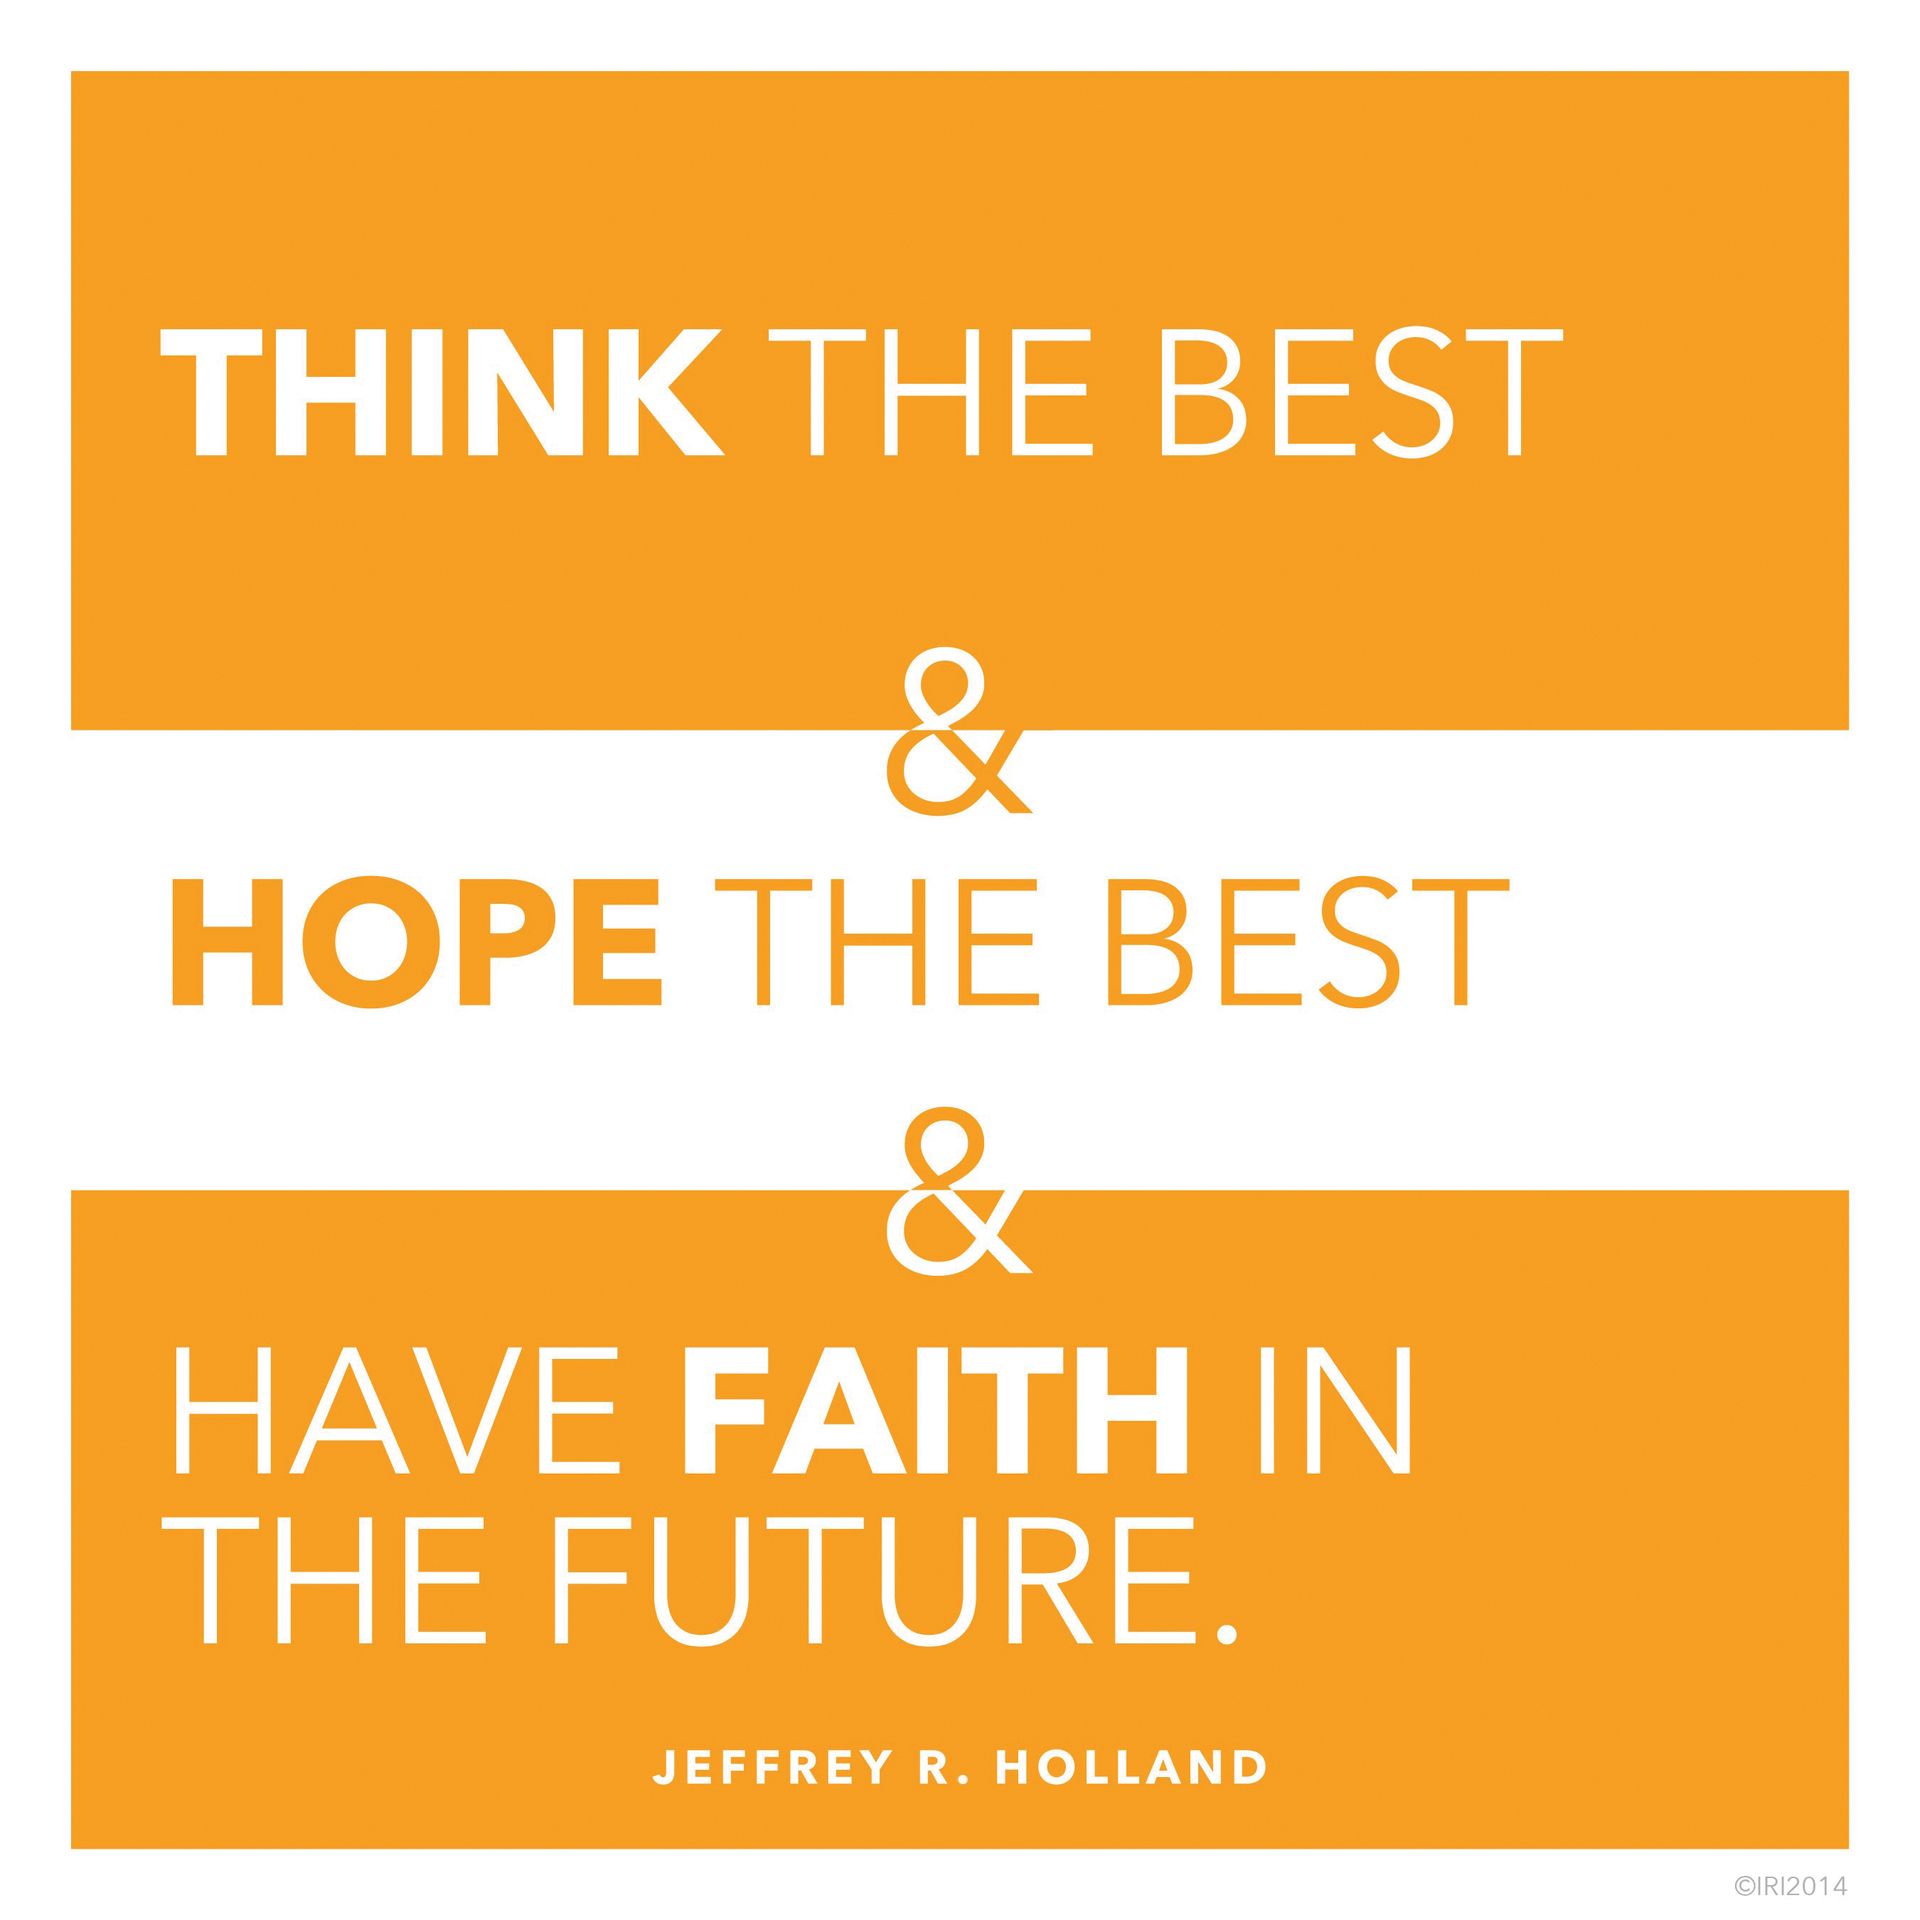 “Think the best and hope the best and have faith in the future.”—Elder Jeffrey R. Holland, “The Confidence of Worthiness”